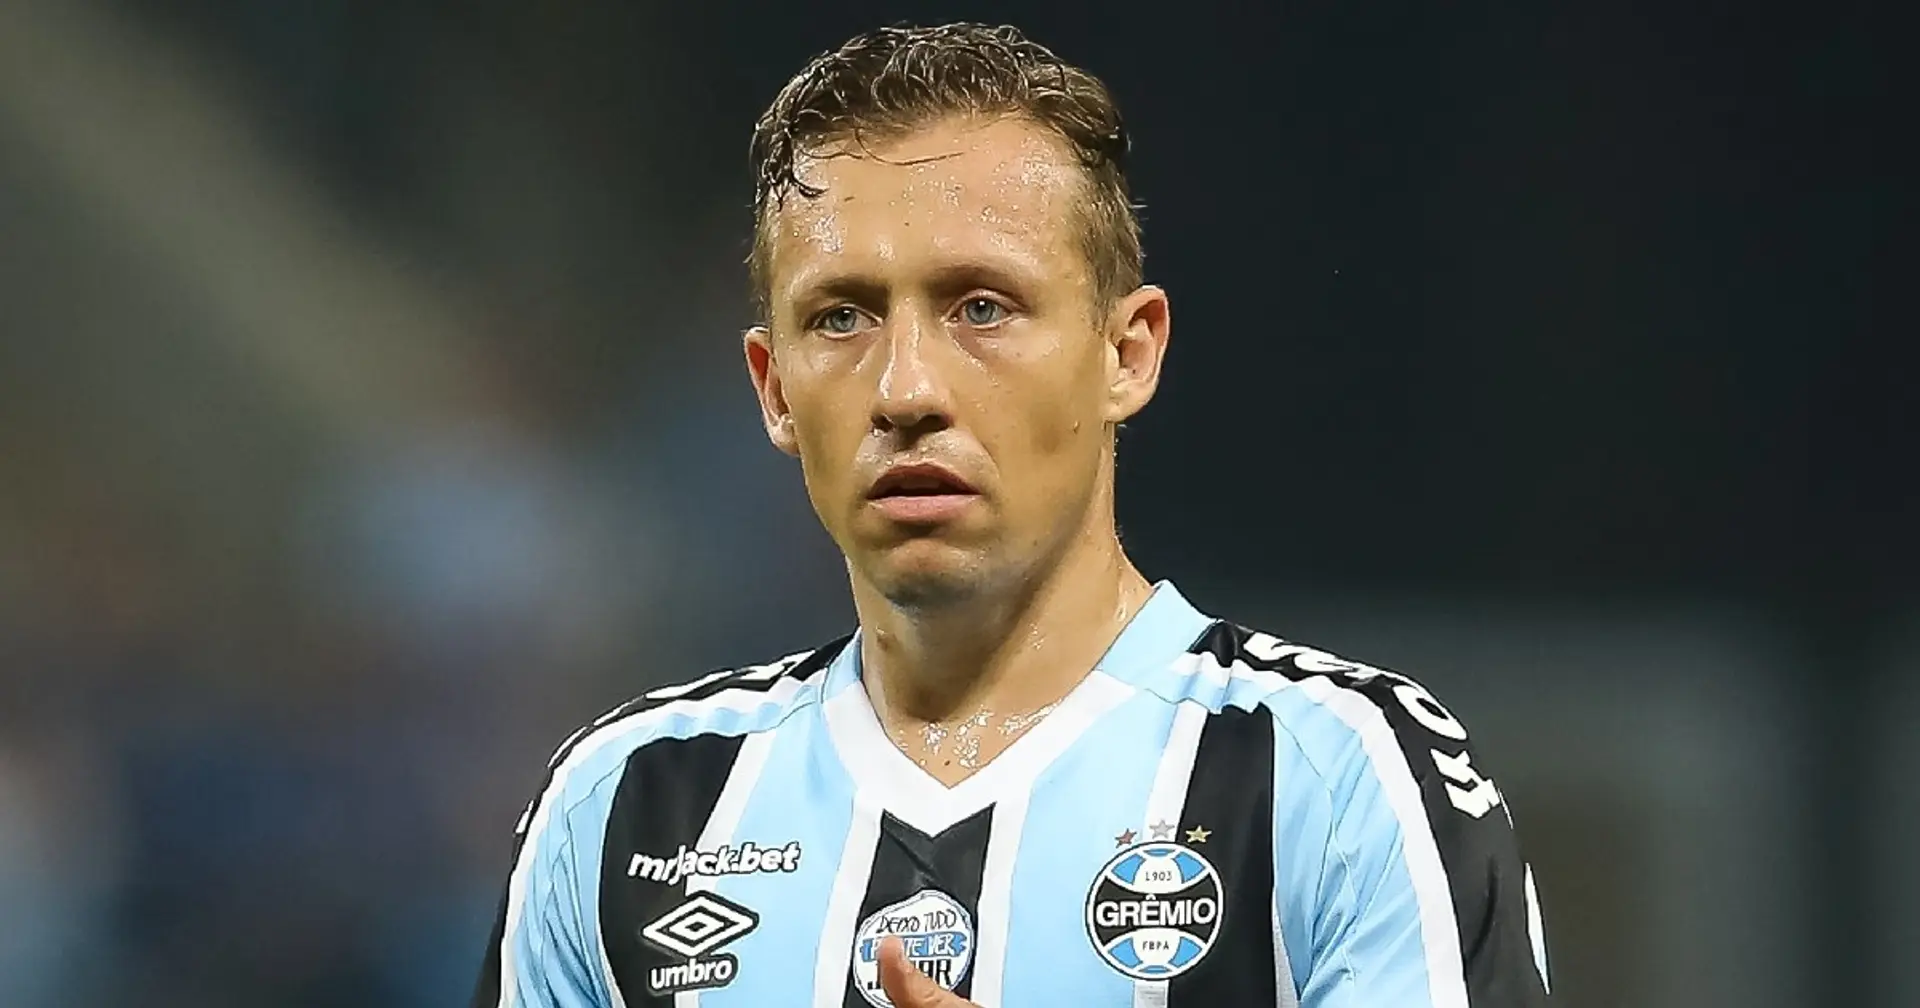 Former Liverpool midfielder Leiva withdrawn from Gremio training after potential heart issue detected